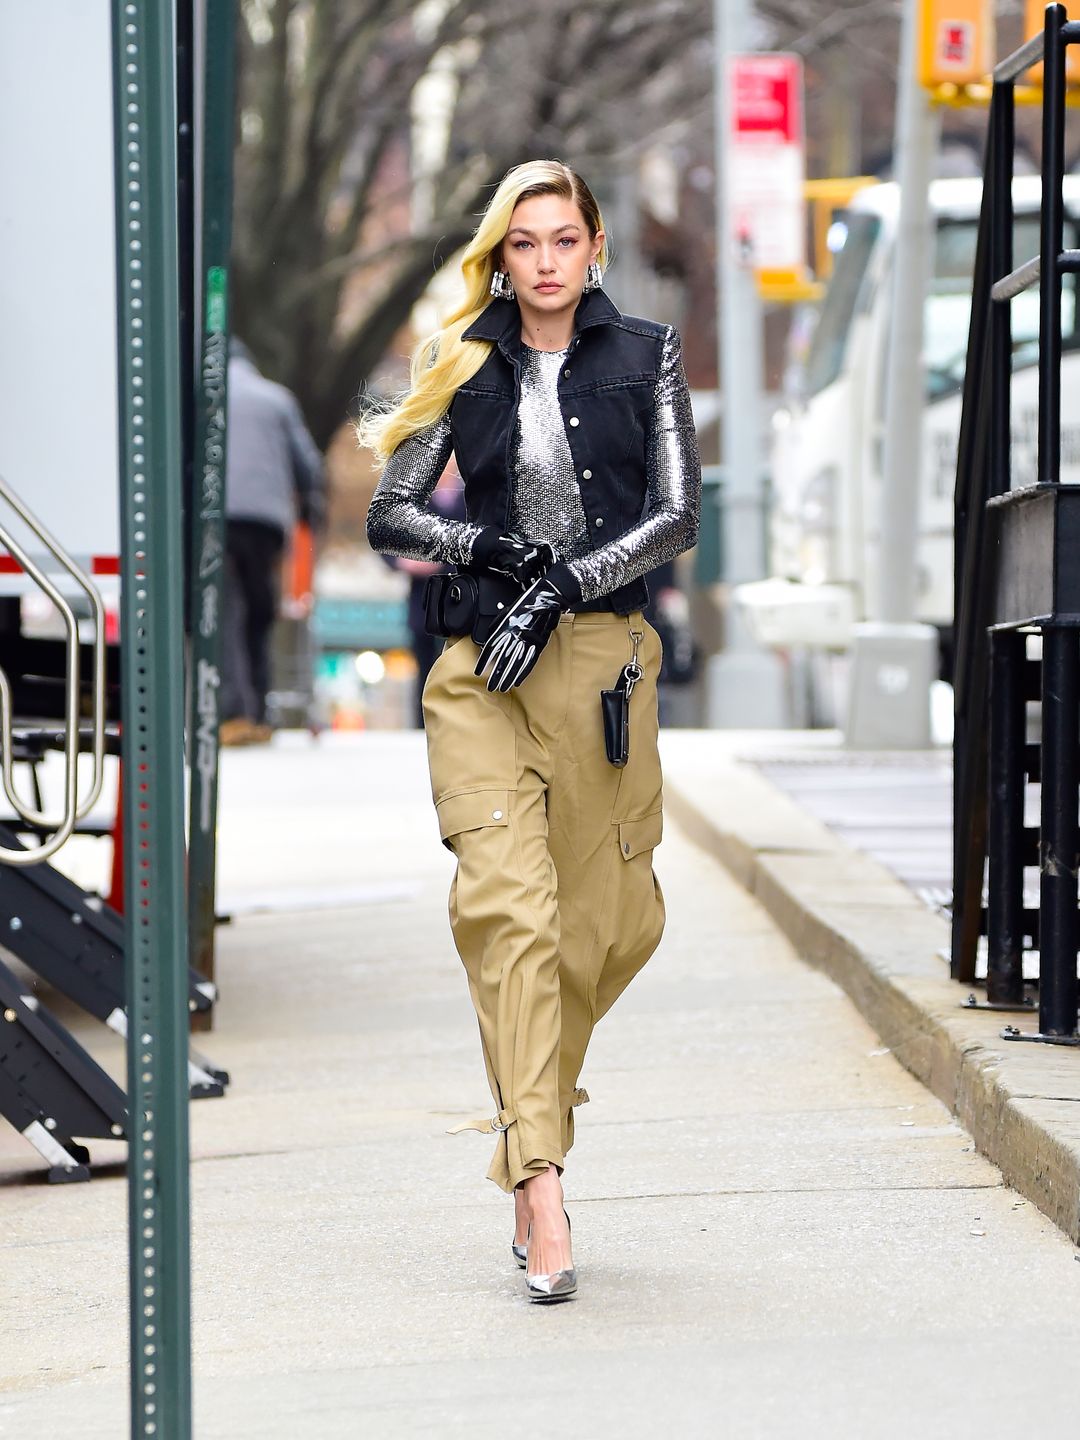 Here's How to Recreate Gigi Hadid's 'Next in Fashion' Outfits on a Budget